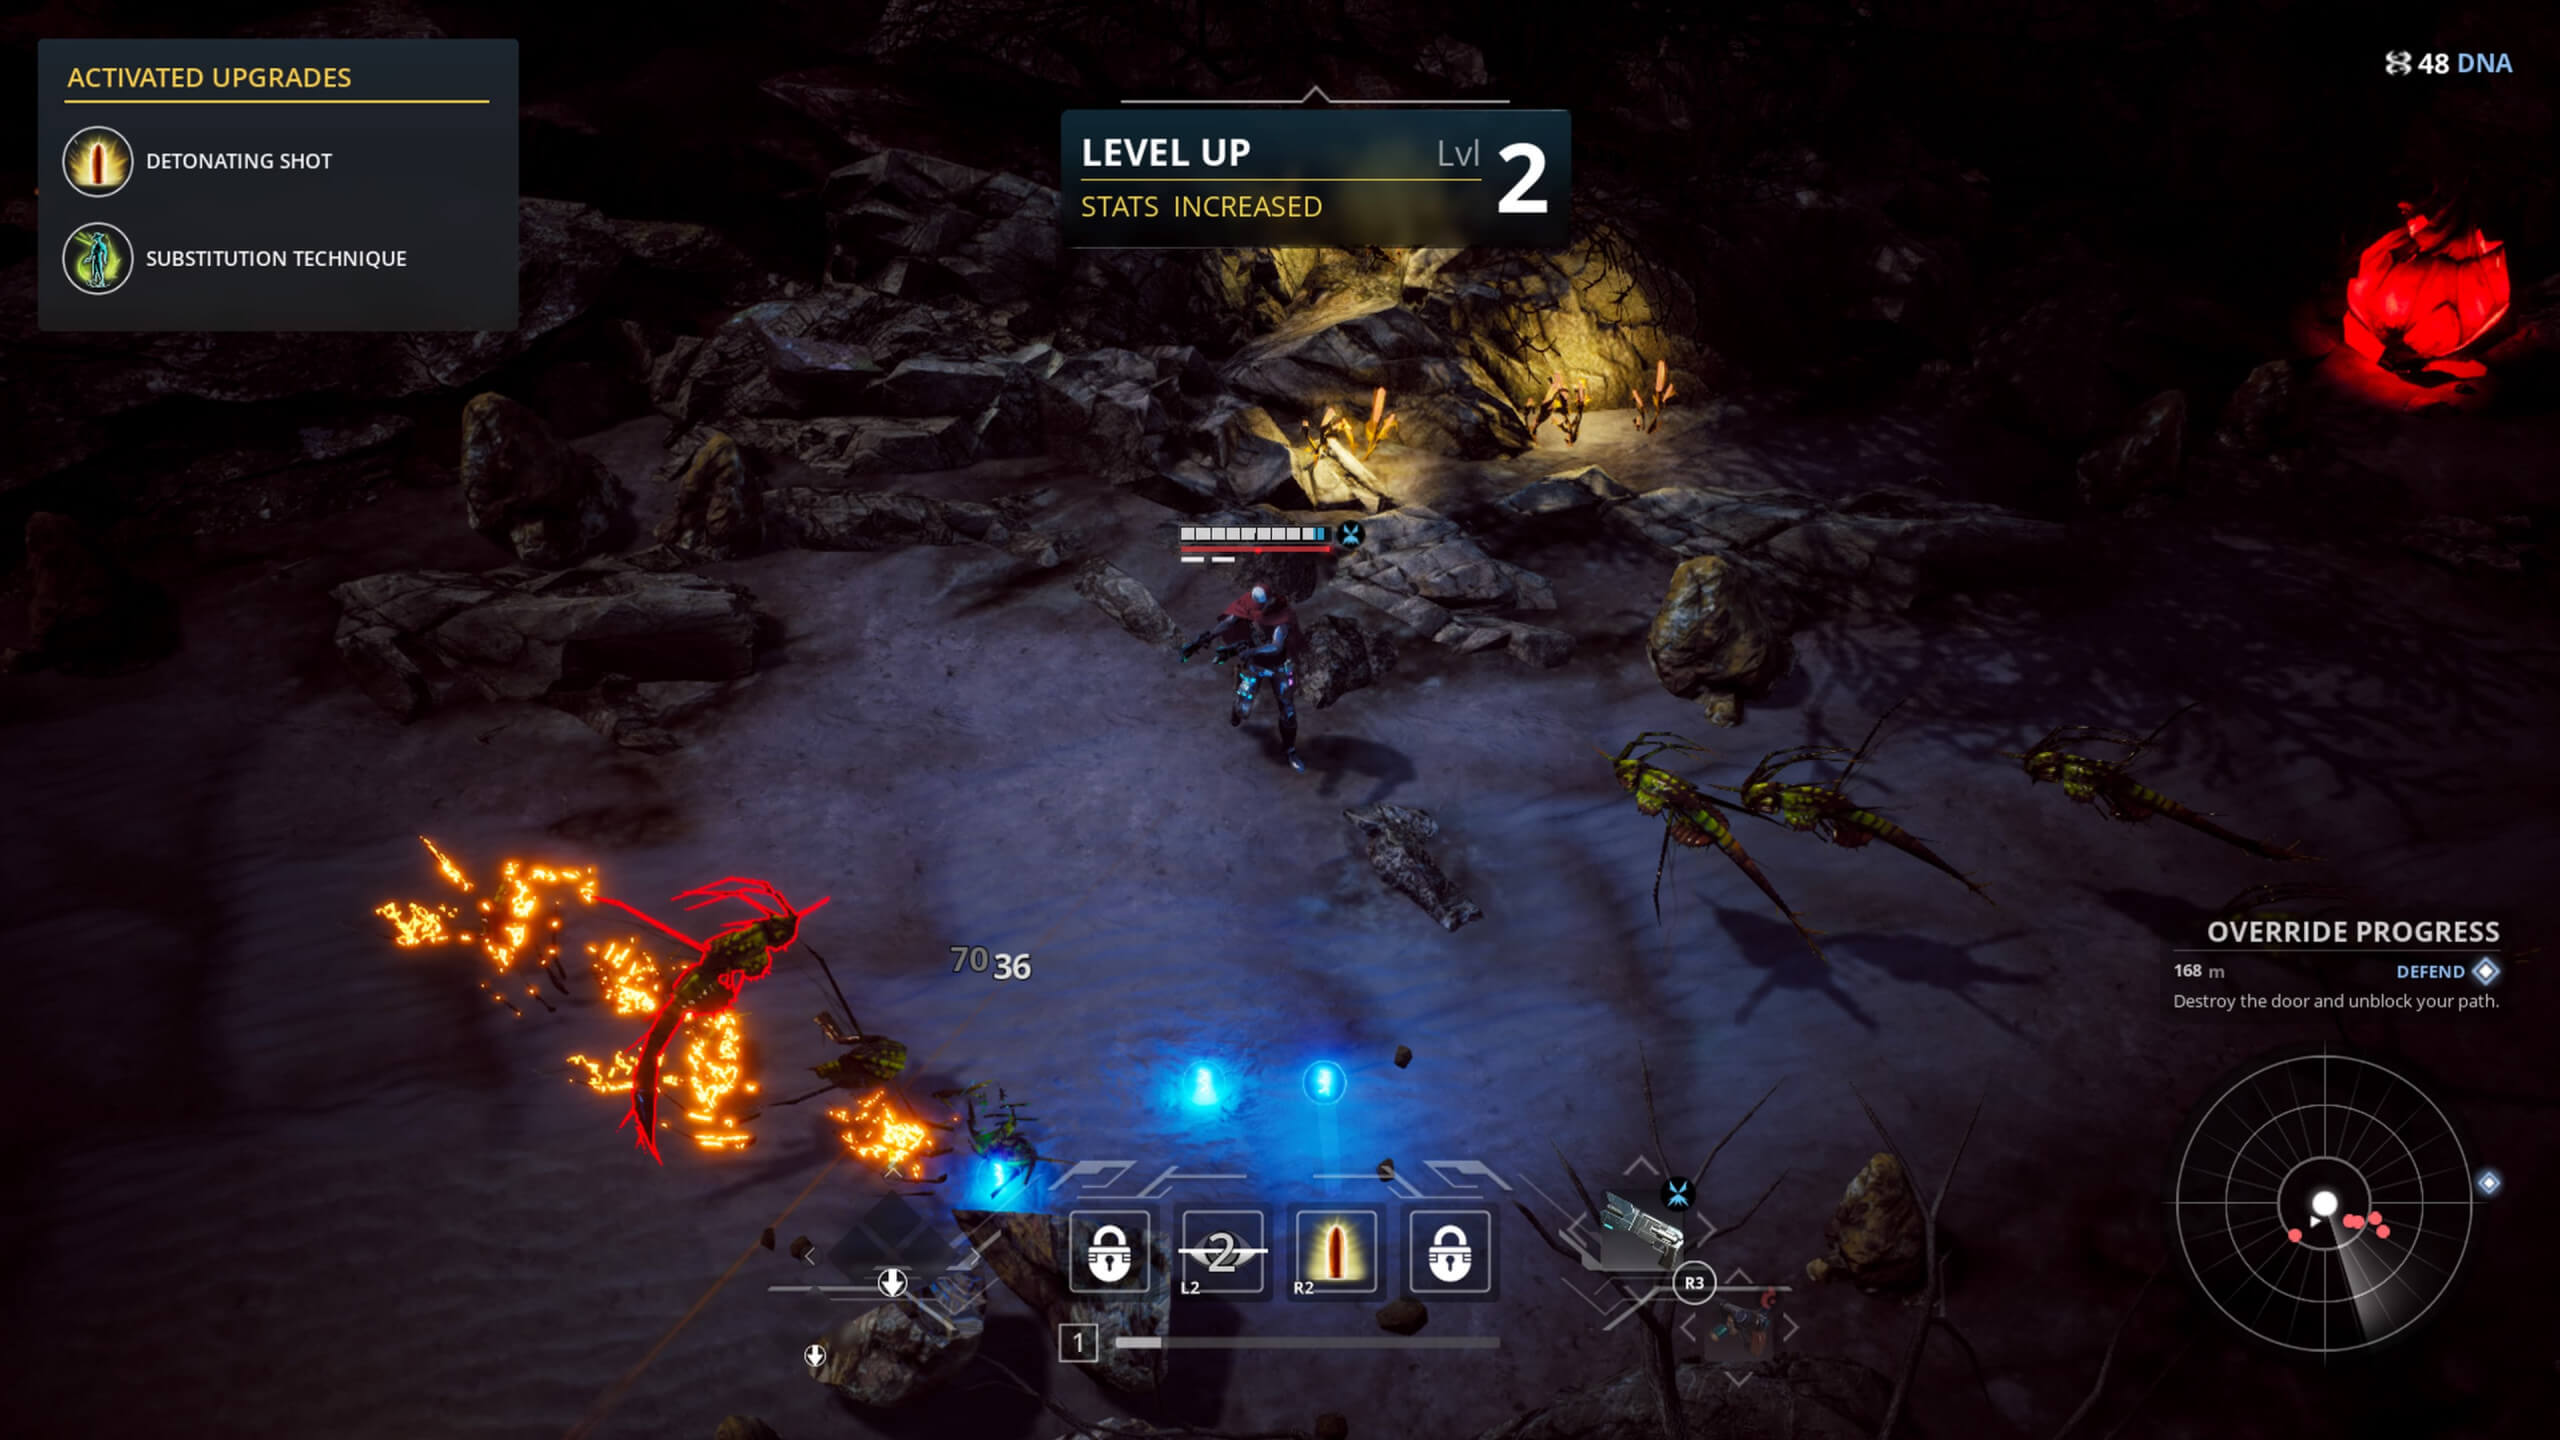 Online Co-Op Action RPG, Killsquad, Launches on July 20th for PS4